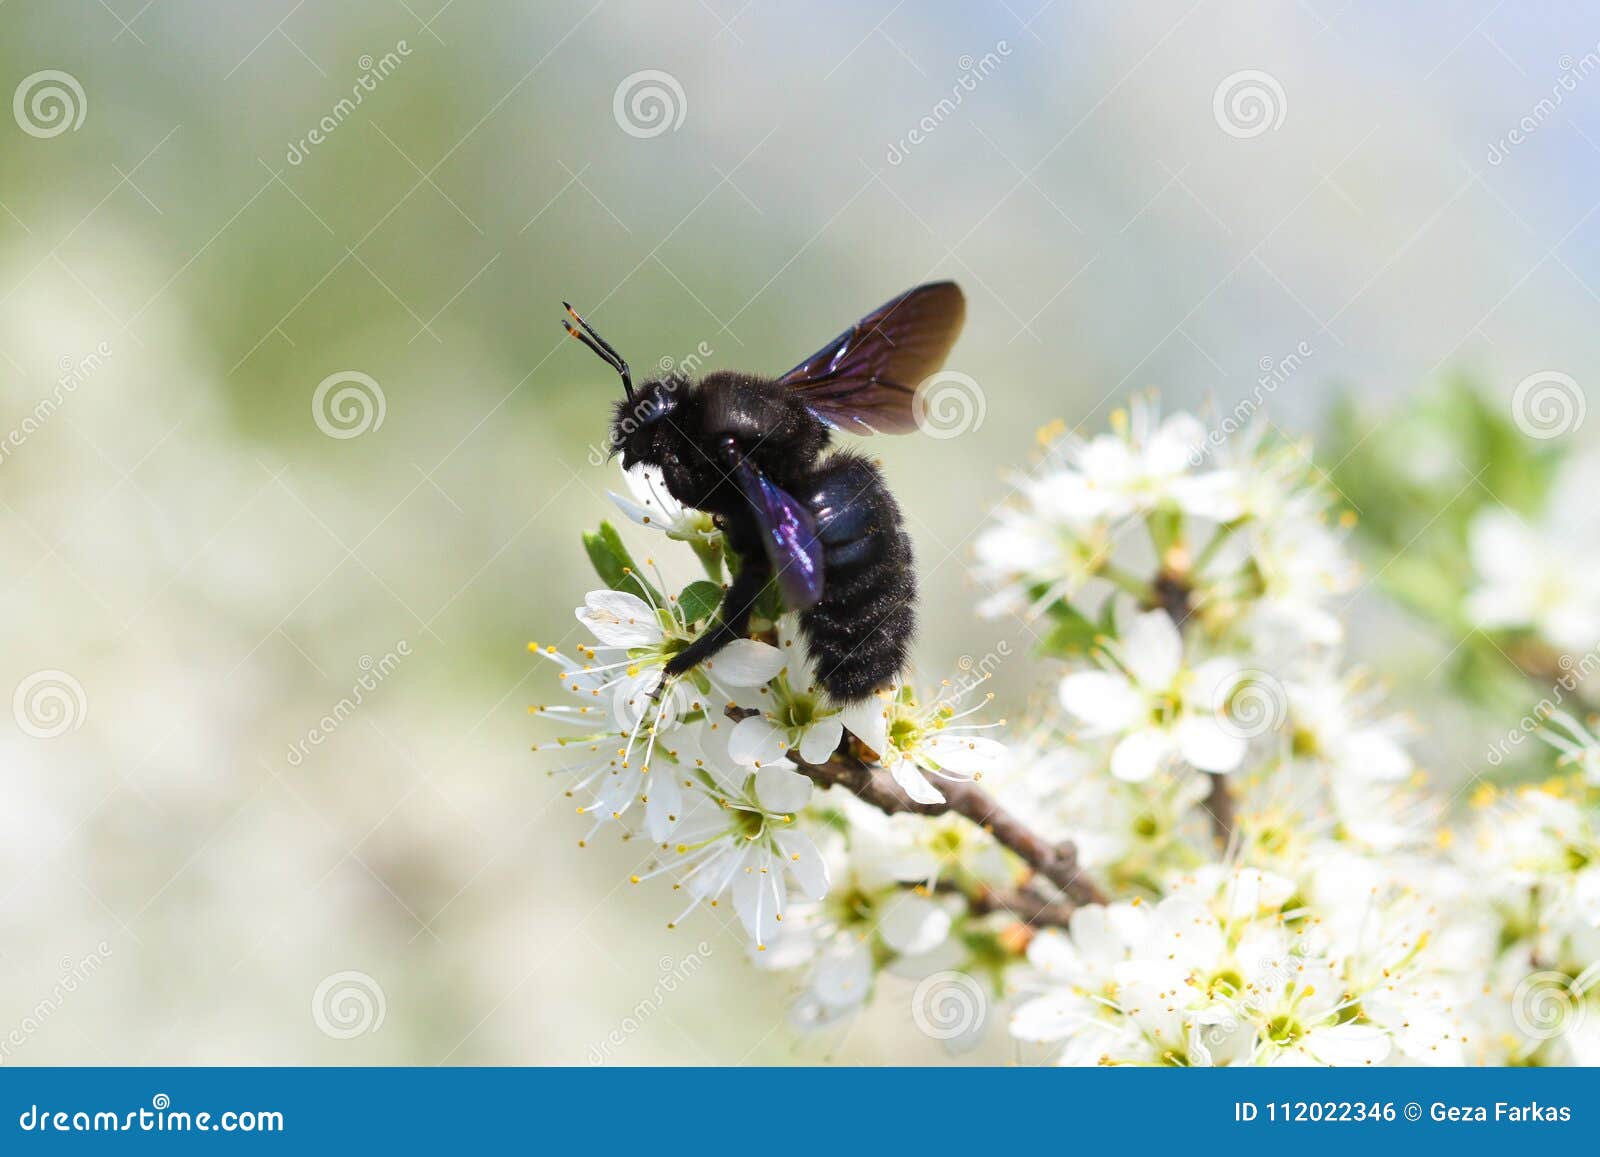 carpenter bee pollinate bloomed flowers in spring